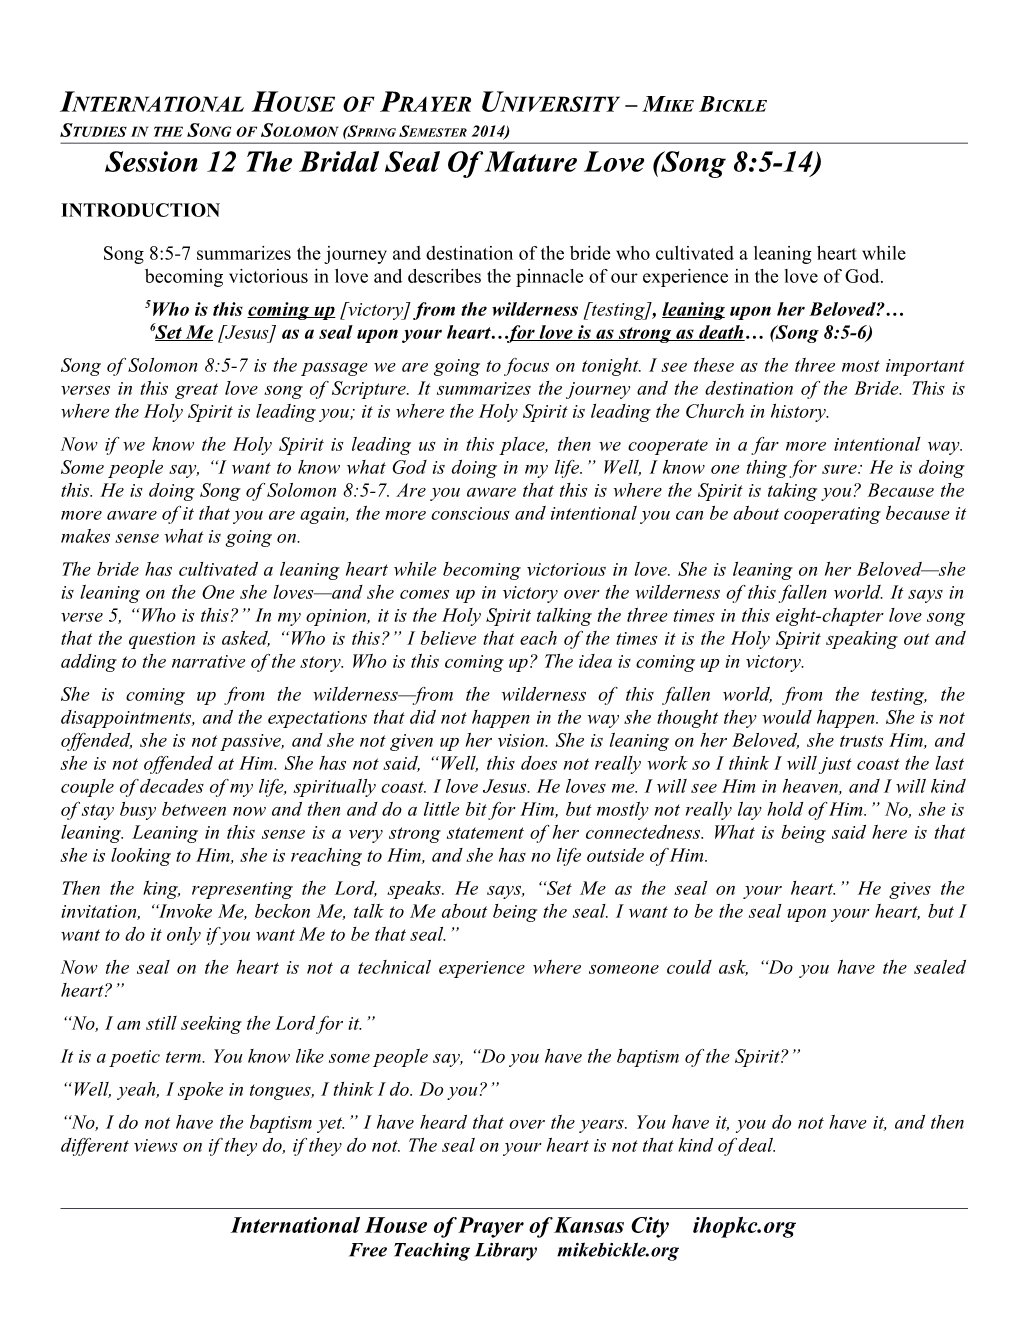 Session 12 the Bridal Seal of Mature Love (Song 8:5-14)